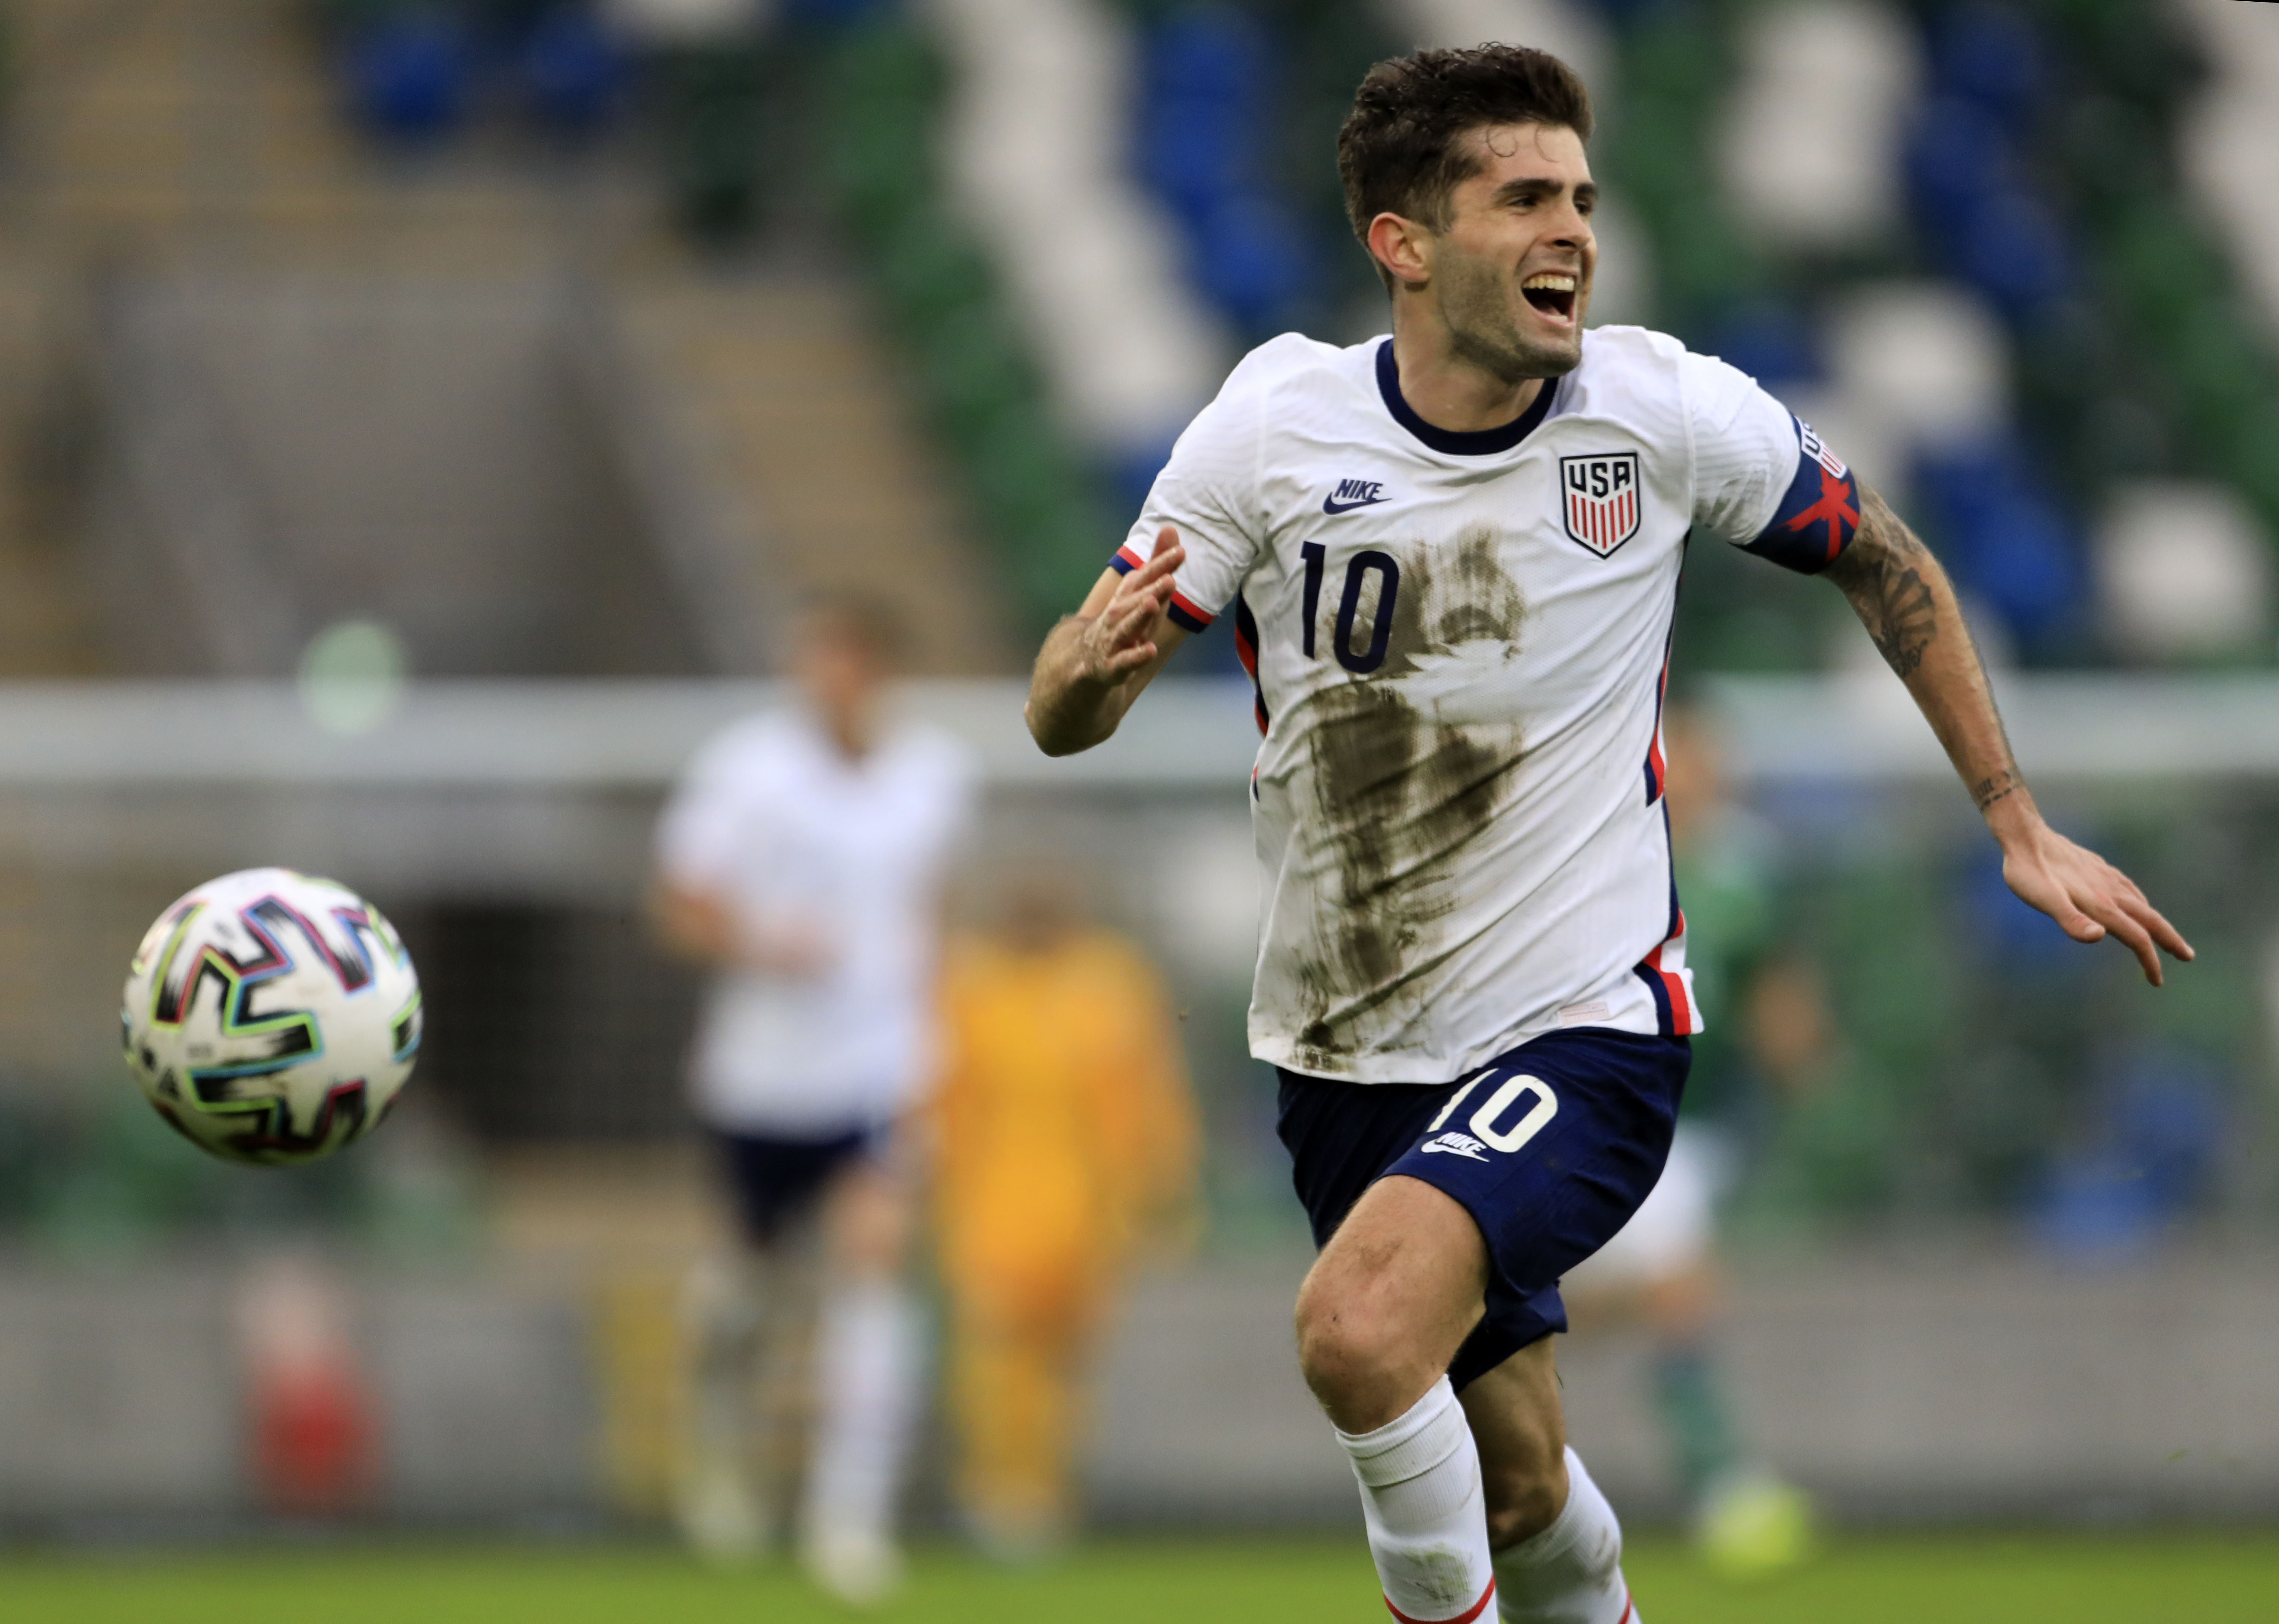 United States mens national soccer team live stream (6/3) How to watch USMNT in CONCACAF semis